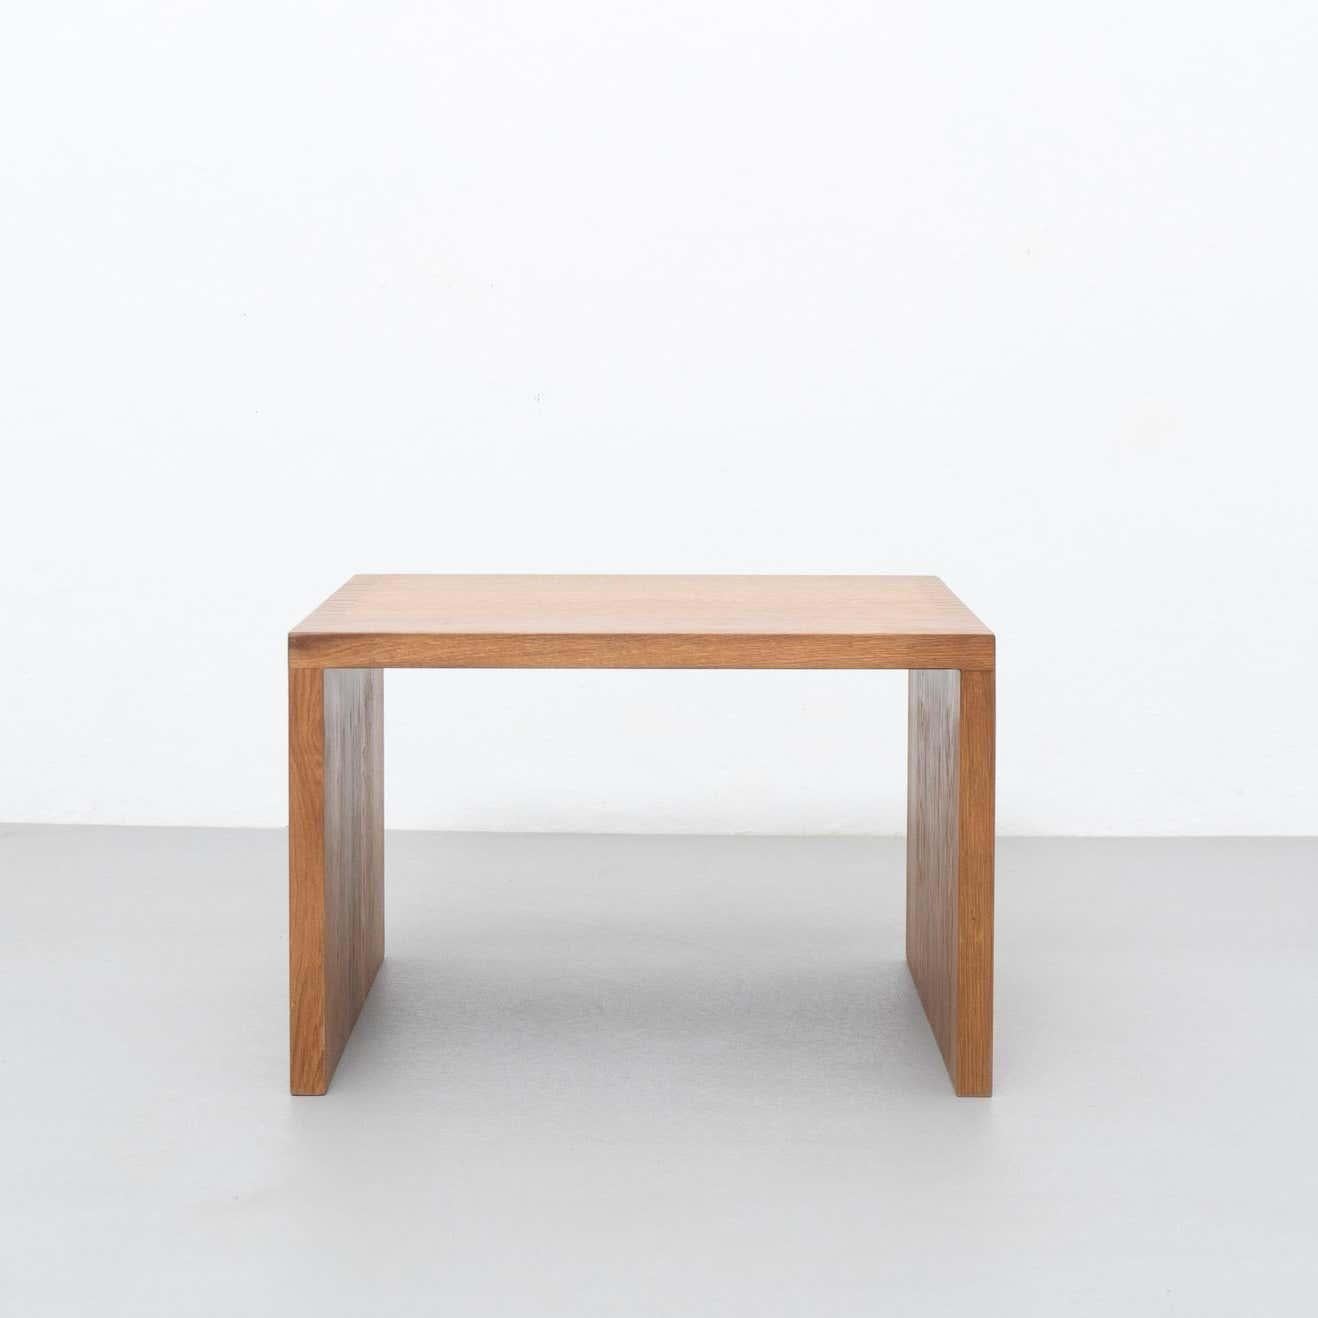 Table by Dada est. manufactured in Barcelona, 2021.

Material: Oak
Dimensions: 60 cm D x 60 cm W x 40 cm H. 

There is the possibility of making it in different measures and woods.

Dada Est. Makes a handmade furniture production with the